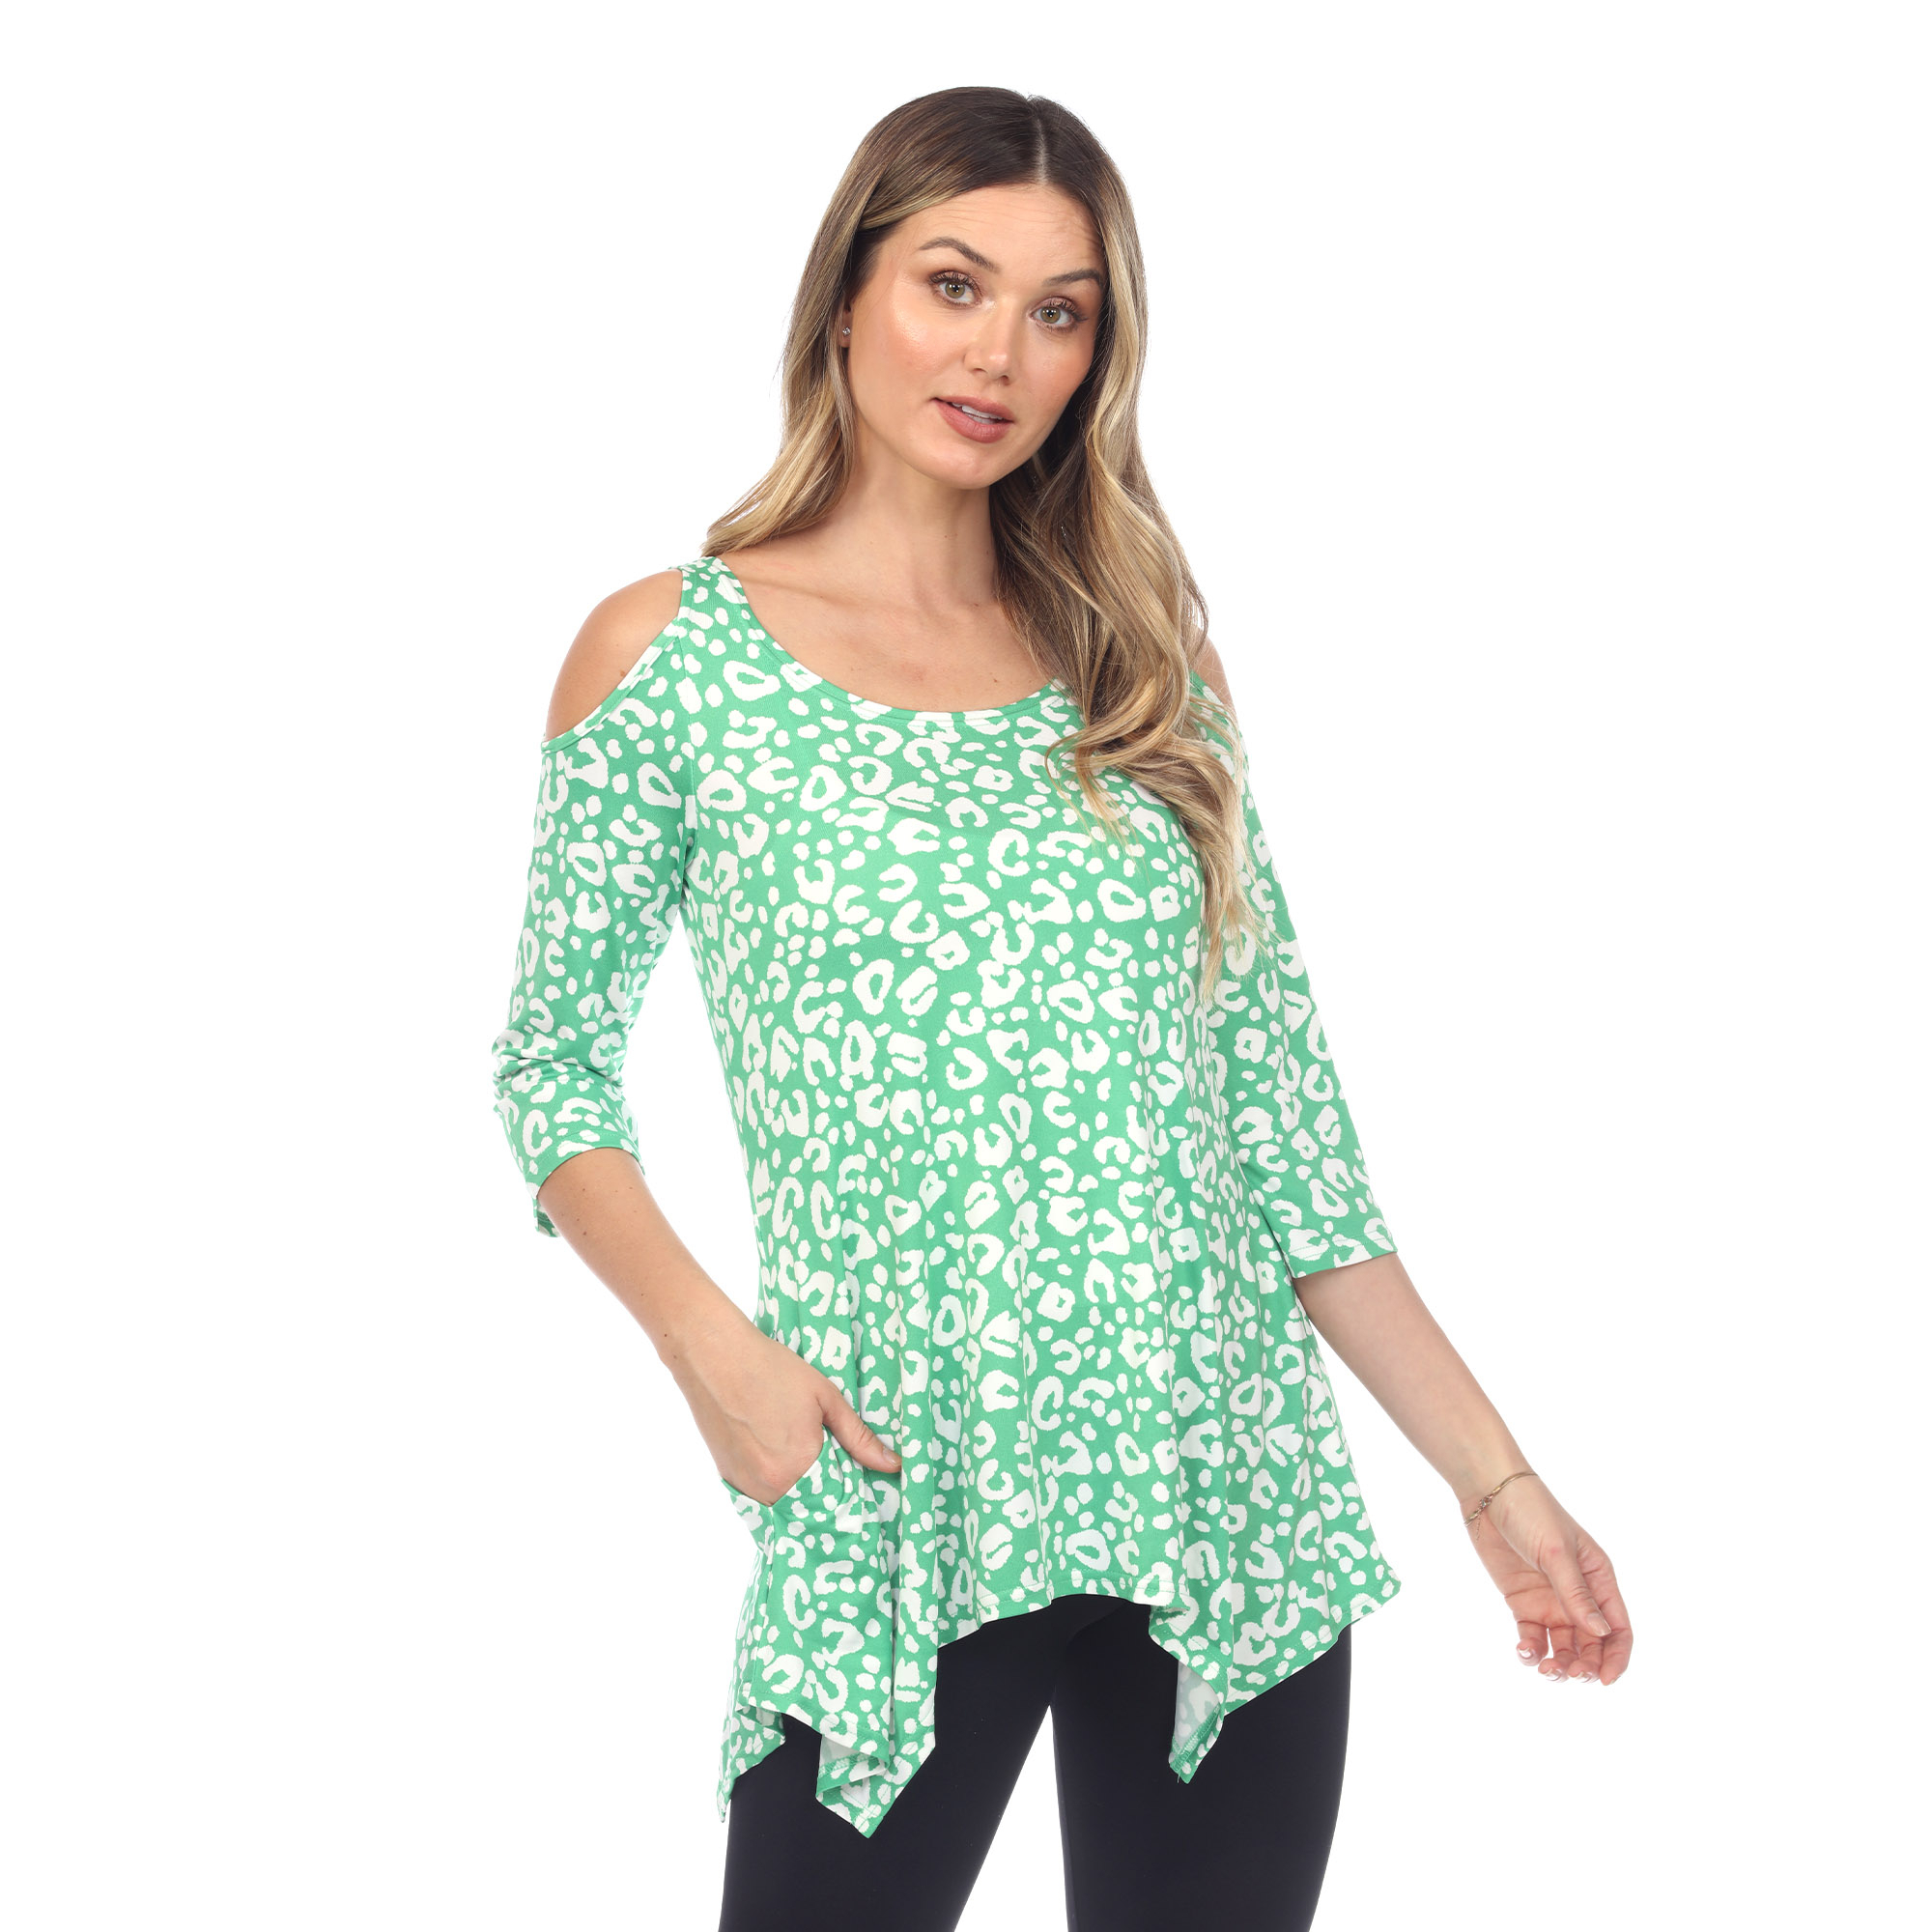 White Mark Women's Leopard Print Cold Shoulder Tunic Top With Pockets - Green, 2X